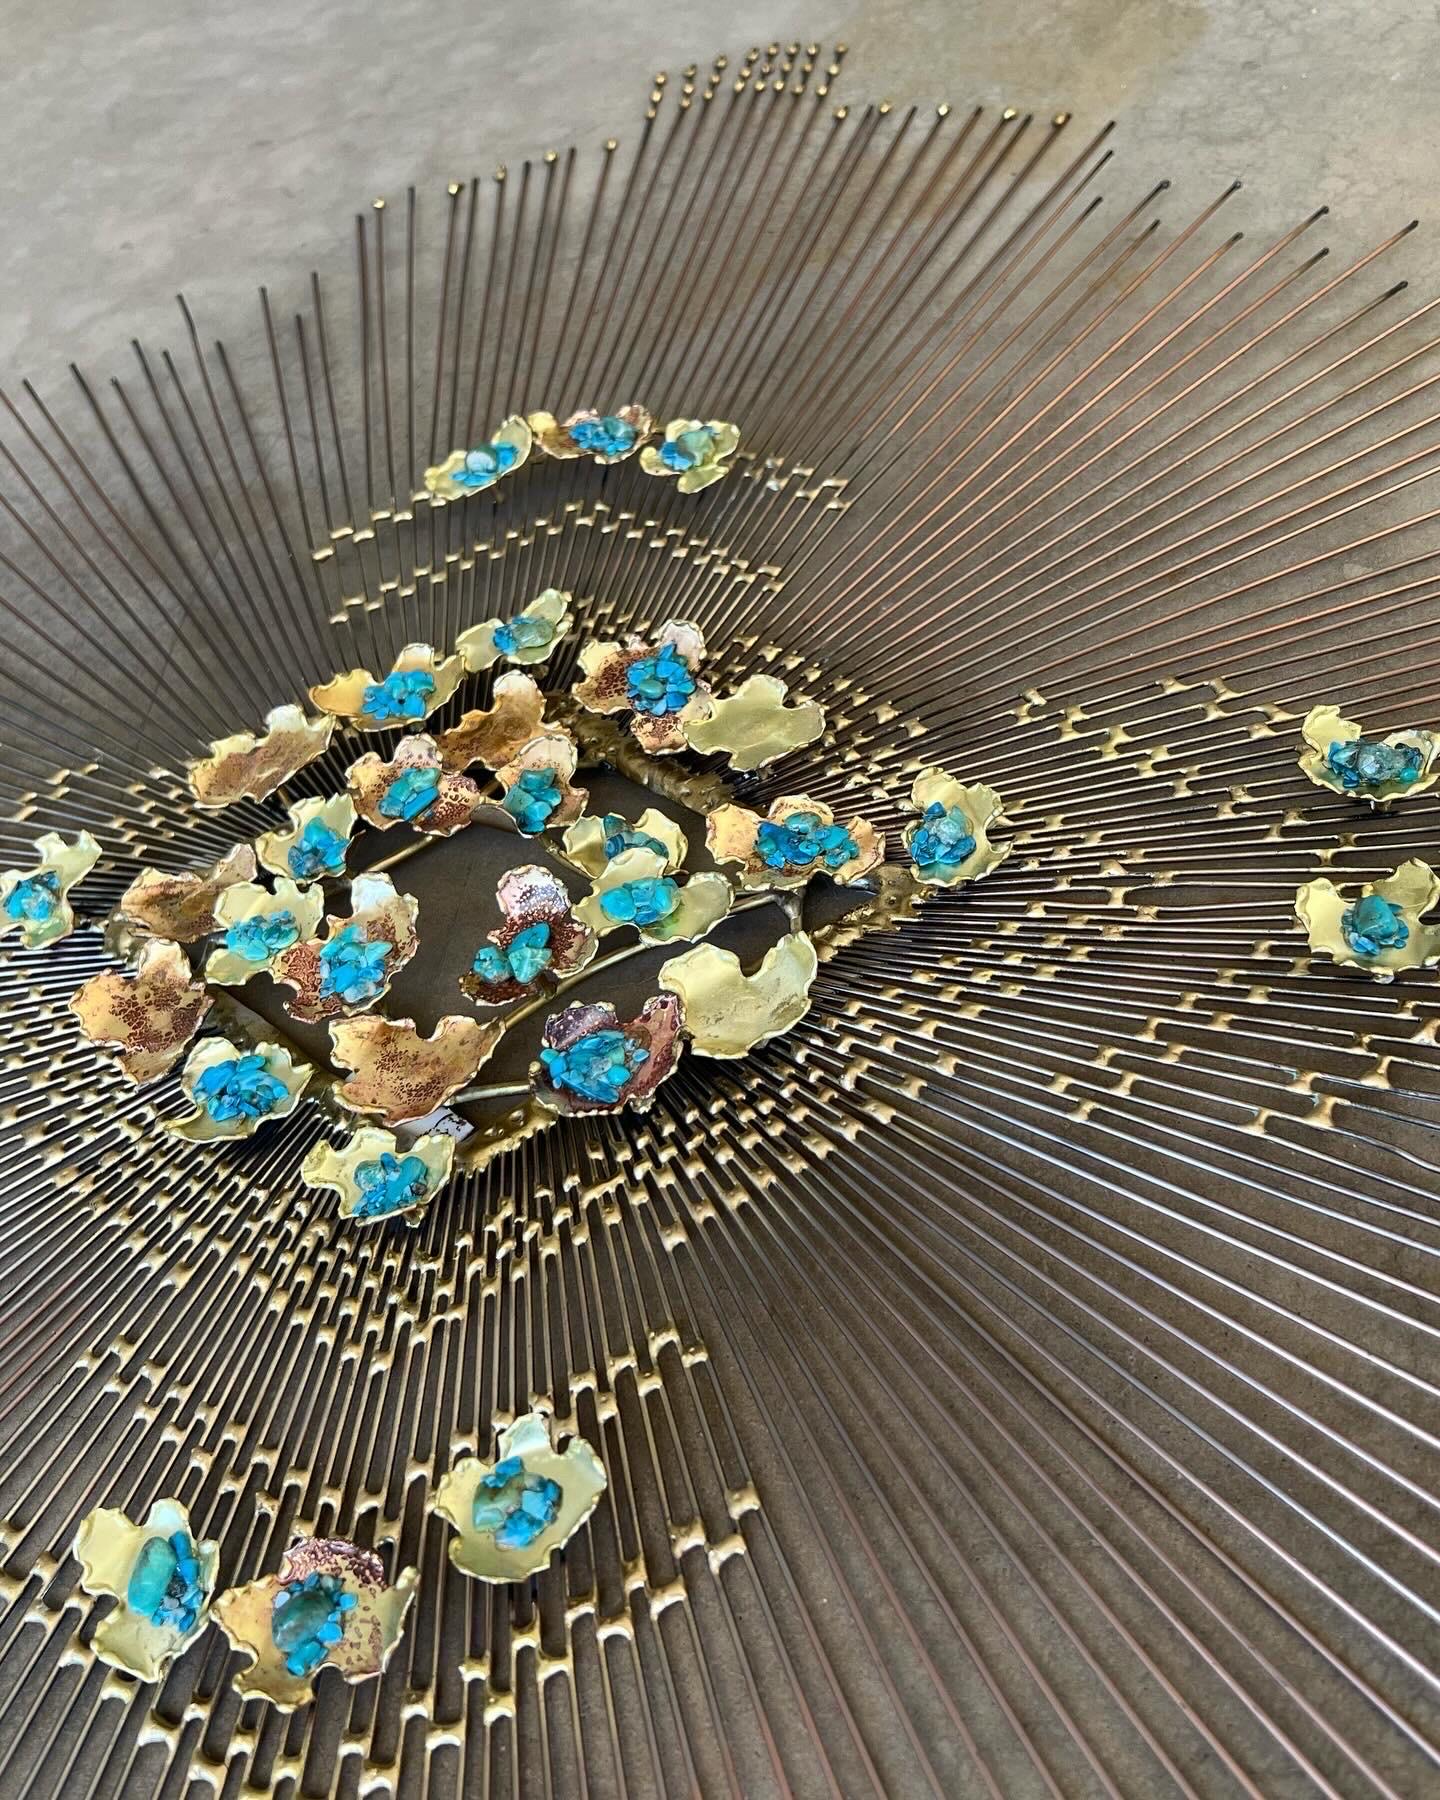 Mid century modern brass starburst wall sculpture with turquoise accents. The age  and maker are unknown, and there is no signature. The style and features are very similar to William and Bruce Friedle pieces around the same time period as C. Jeré